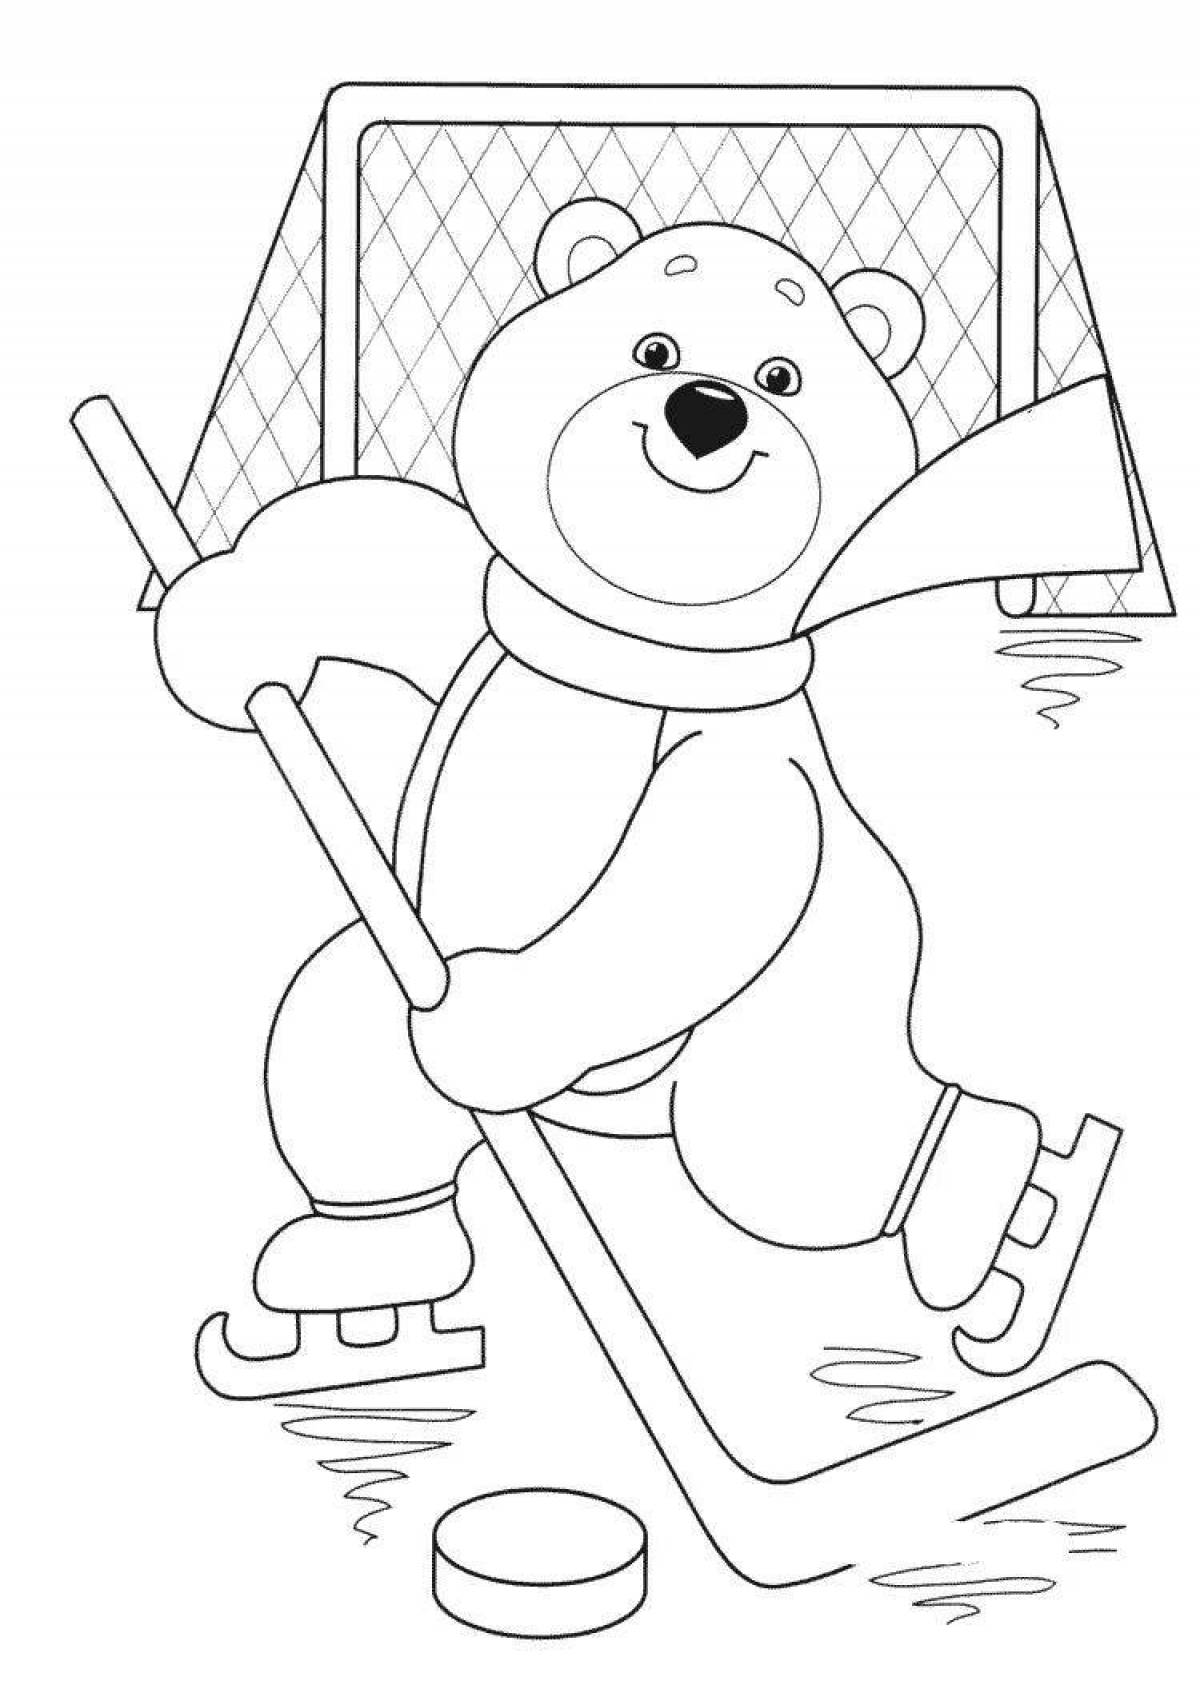 Amazing winter olympic games for kids